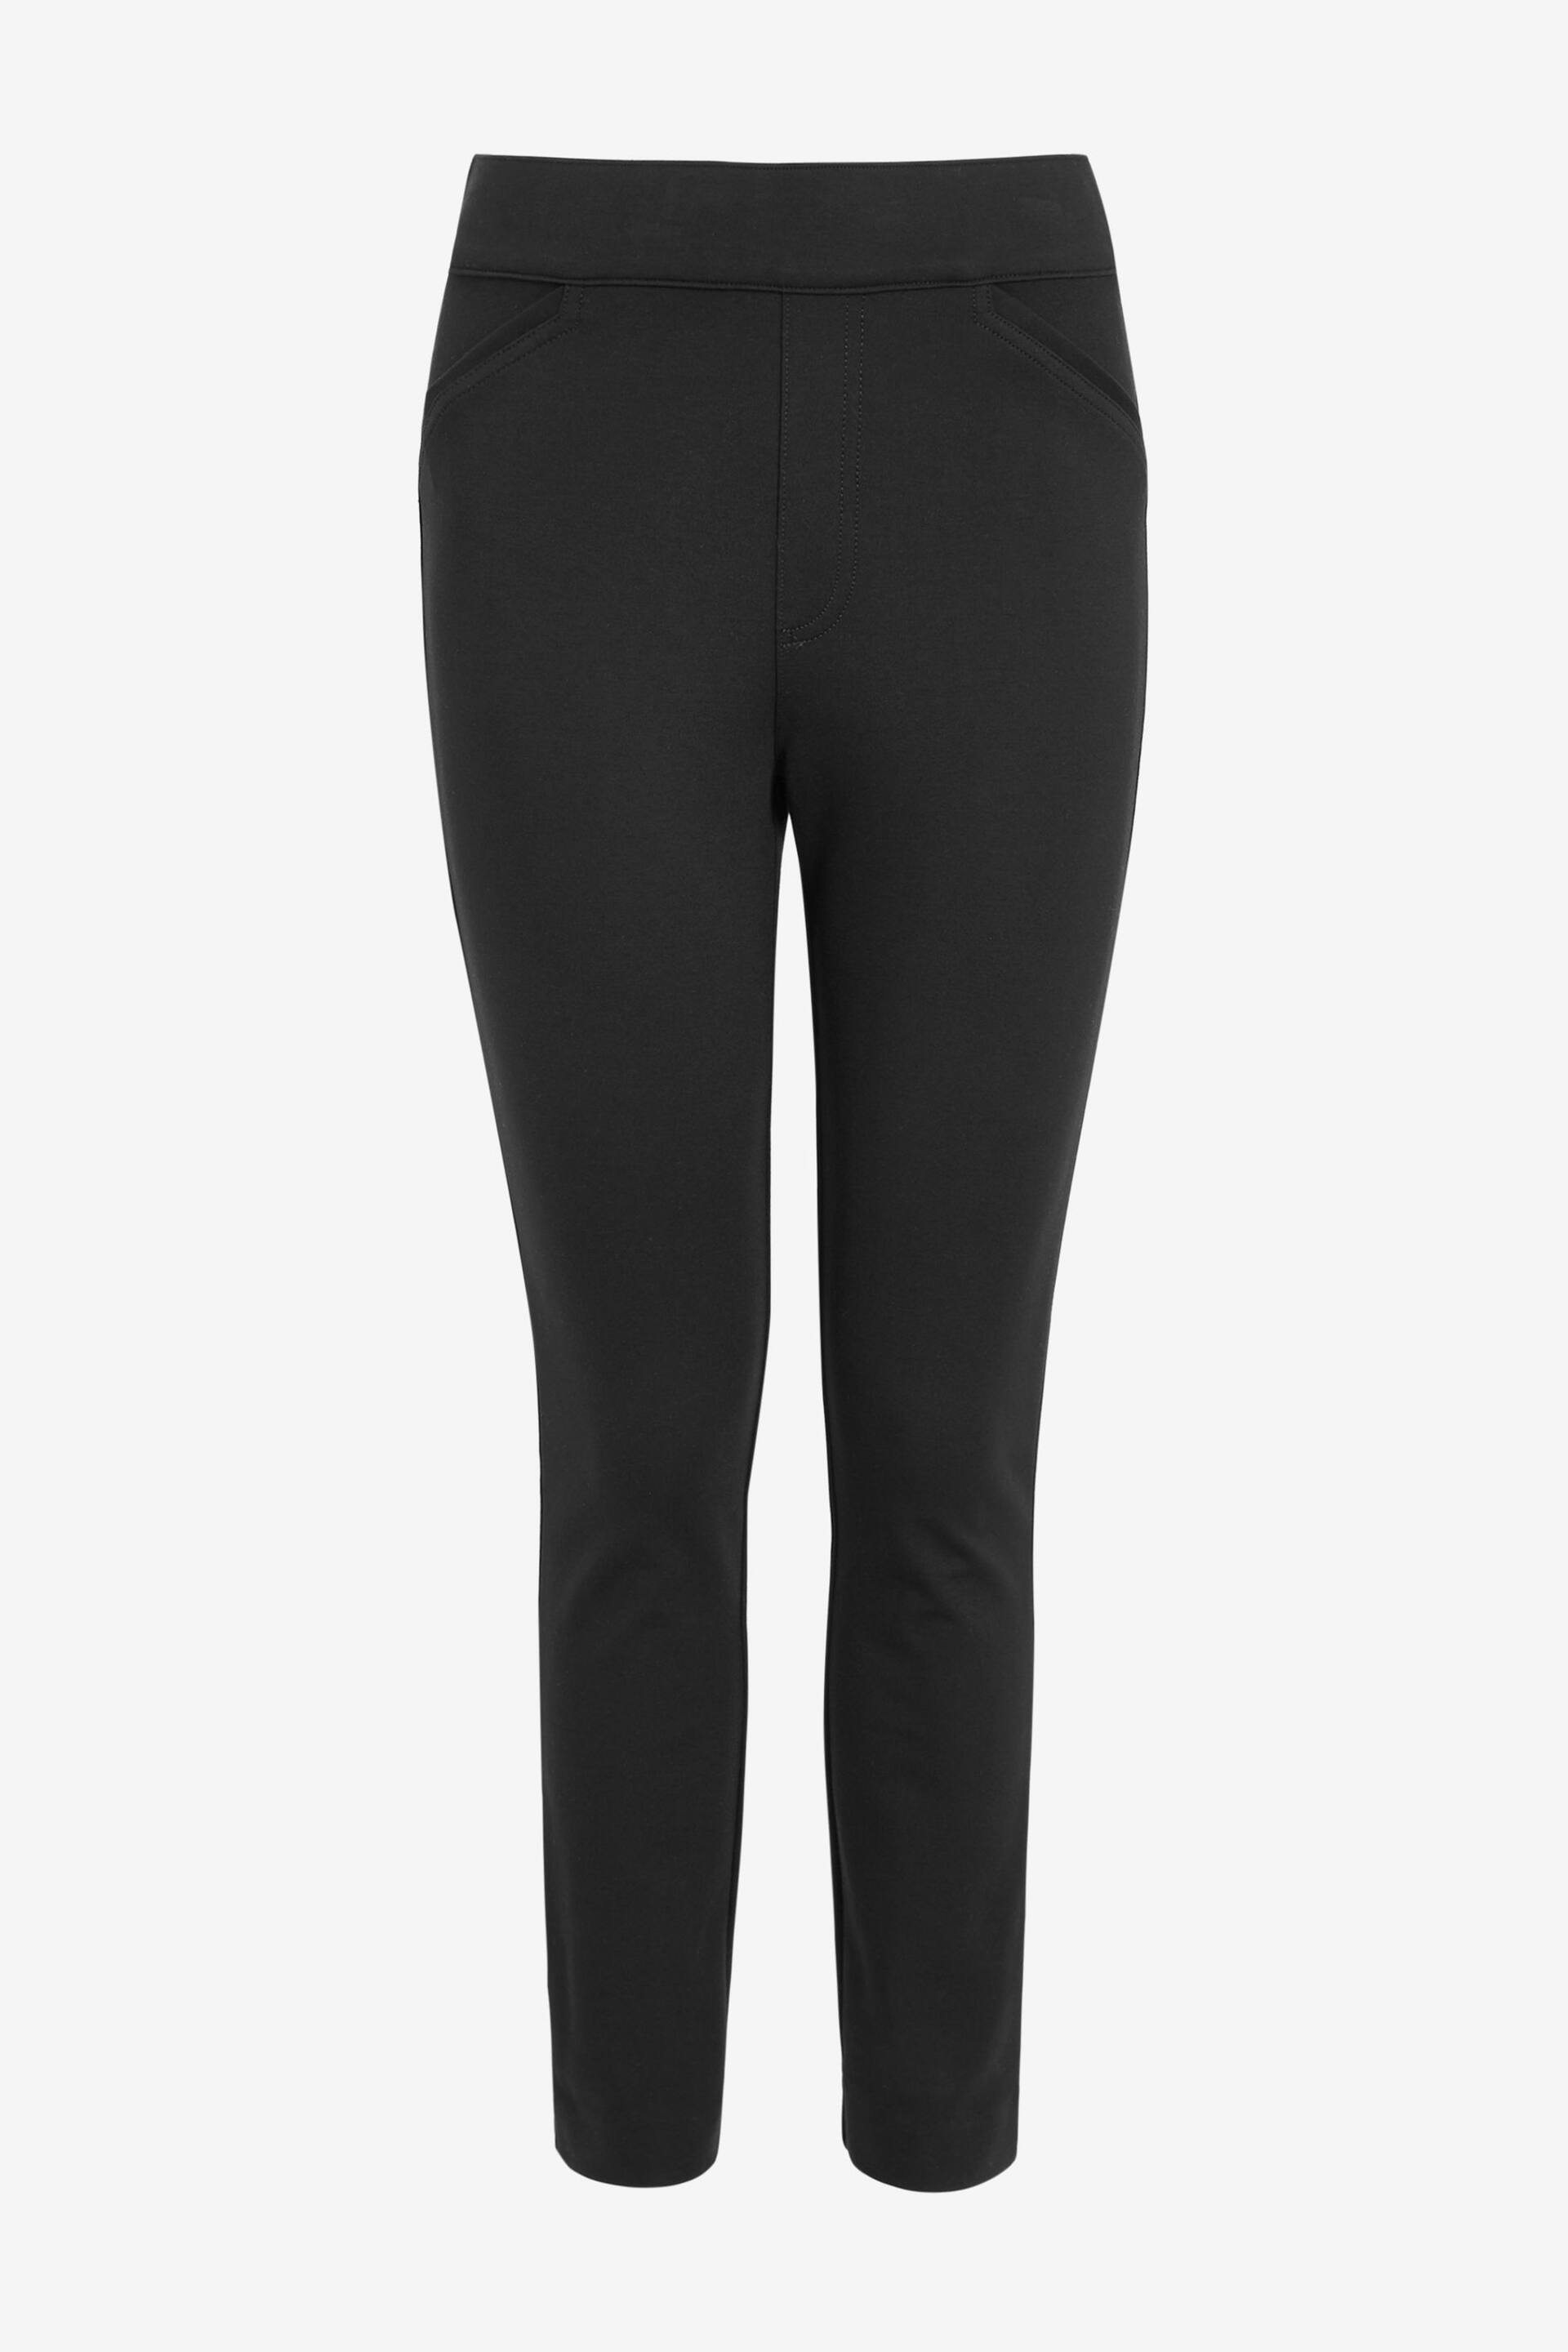 SPANX® Medium Control The Perfect Trousers, Back Seam Skinny - Image 7 of 7